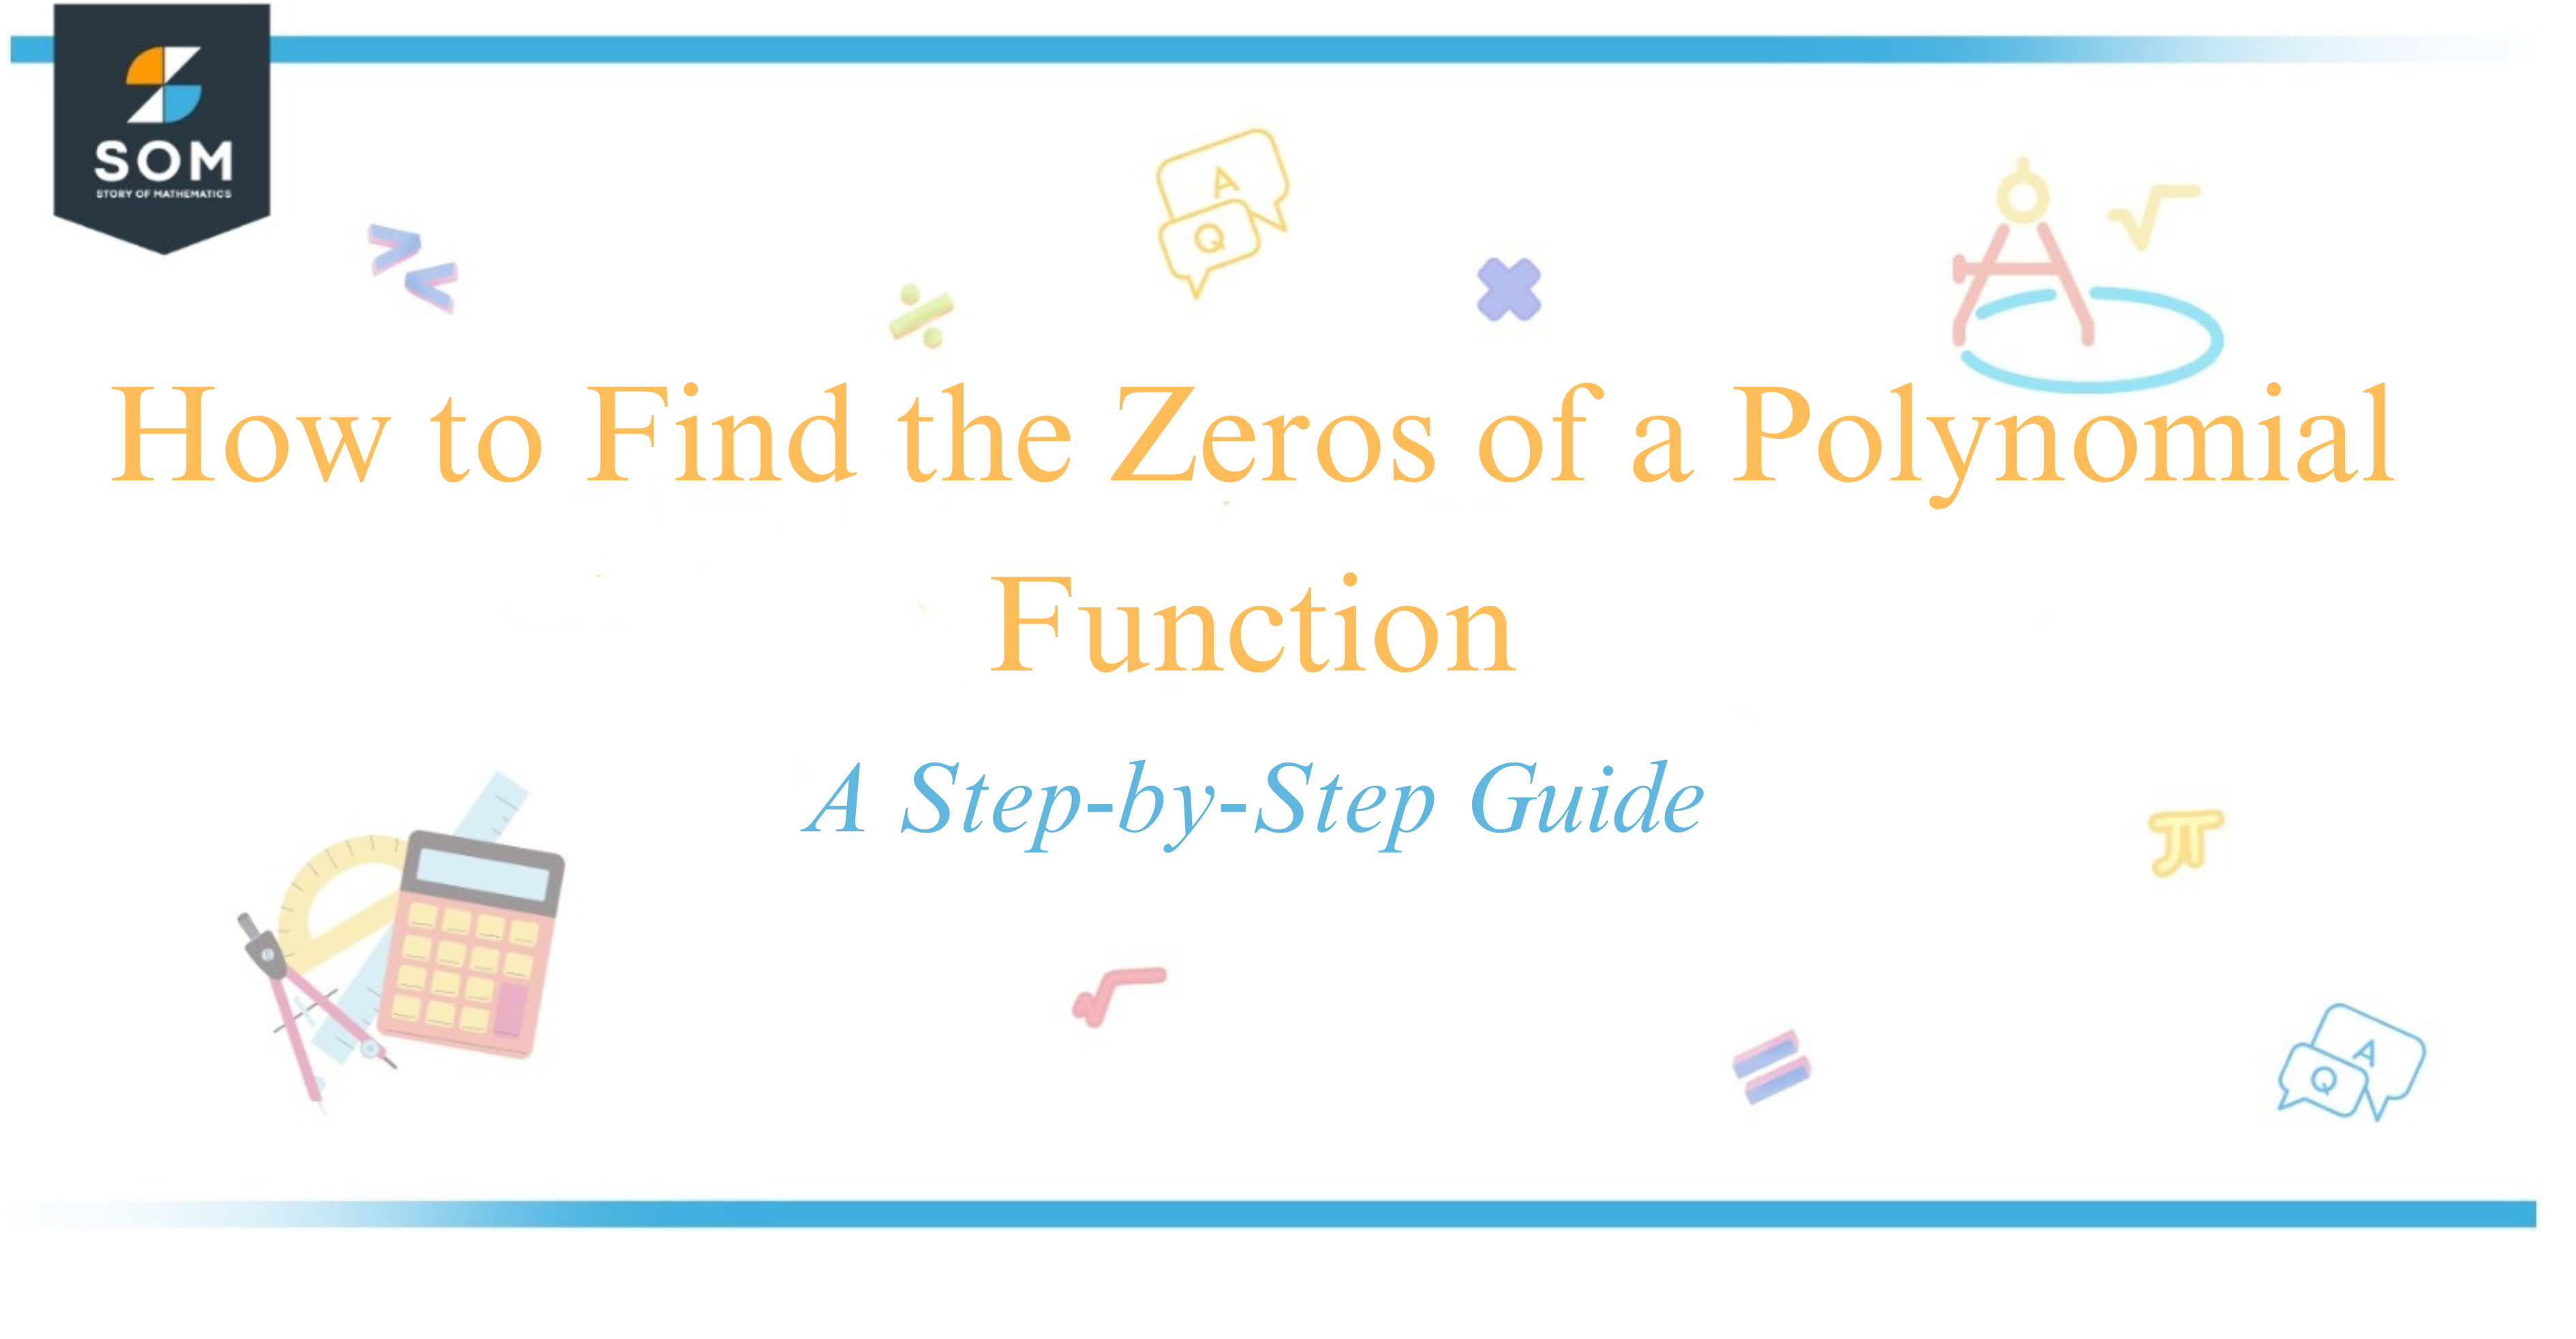 How to Find the Zeros of a Polynomial Function A Step-by-Step Guide